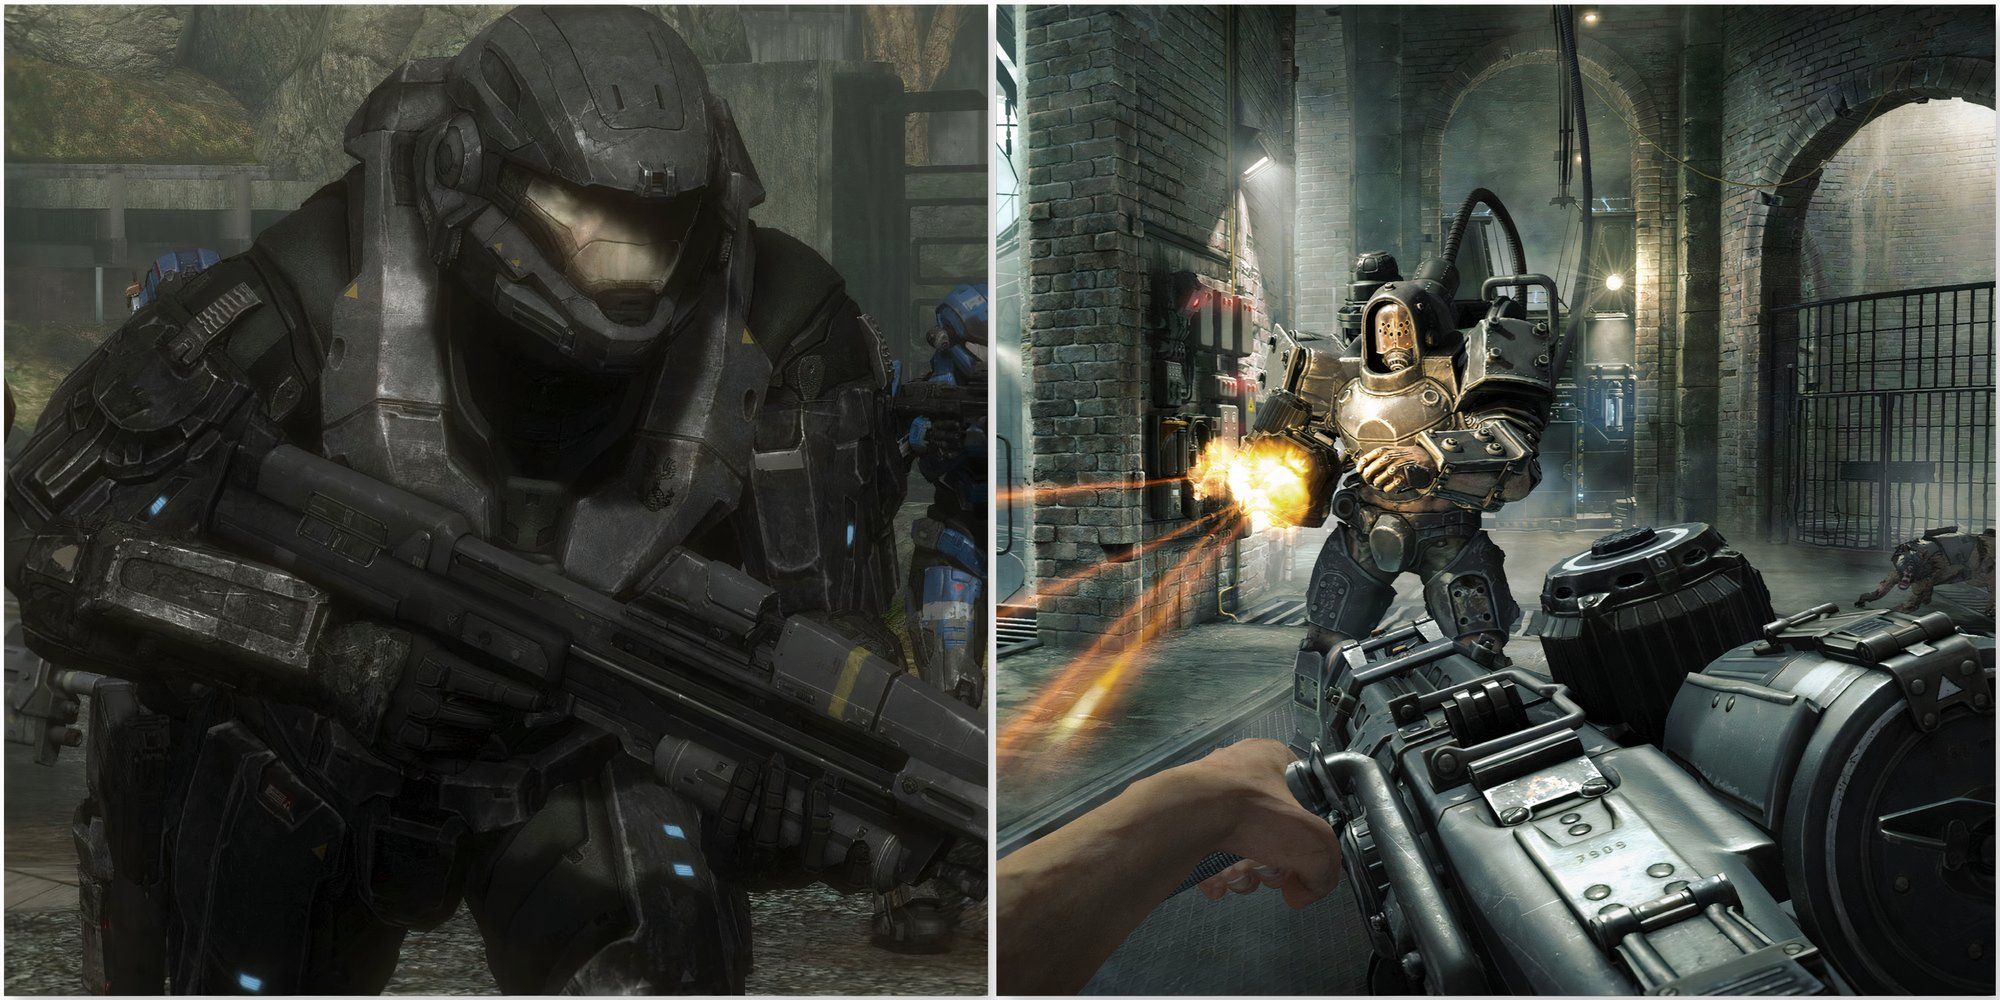 A spartan in Halo Reach and Shooting enemies in Wolfenstein The Old Blood